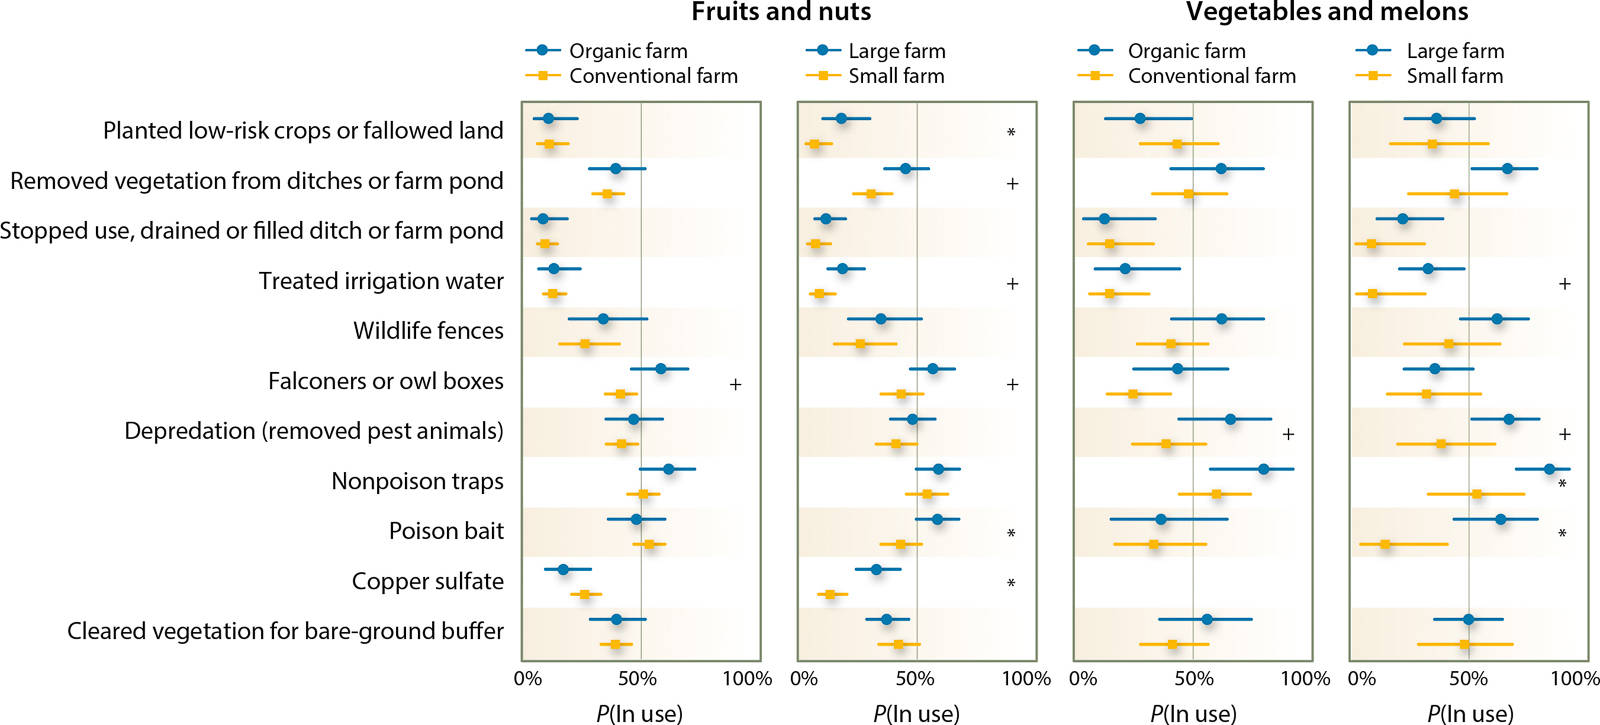 On-farm practices for food safety among California produce growers. Points are mean model-predicted probabilities that a respondent reported using the on-farm practice for food safety. The left panel reports probabilities for fruit and nut growers (n = 282 to 306), while the right reports probabilities for vegetable and melon growers (n = 74 to 79). For each type of grower, the second column compares organic versus conventional producers and the second column compares large farms versus small farms. Lines are confidence intervals, asterisks (*) denote significance under likelihood ratio tests after multiple test correction, and plus signs (+) denote significance without multiple test correction. Too few vegetable and melon growers reported using copper sulfate to model the effect of organic status or farm size. Model parameters, practice-specific n-values, and P-values are presented in table S1 (ucanr.edu/u.cfm?id=142).